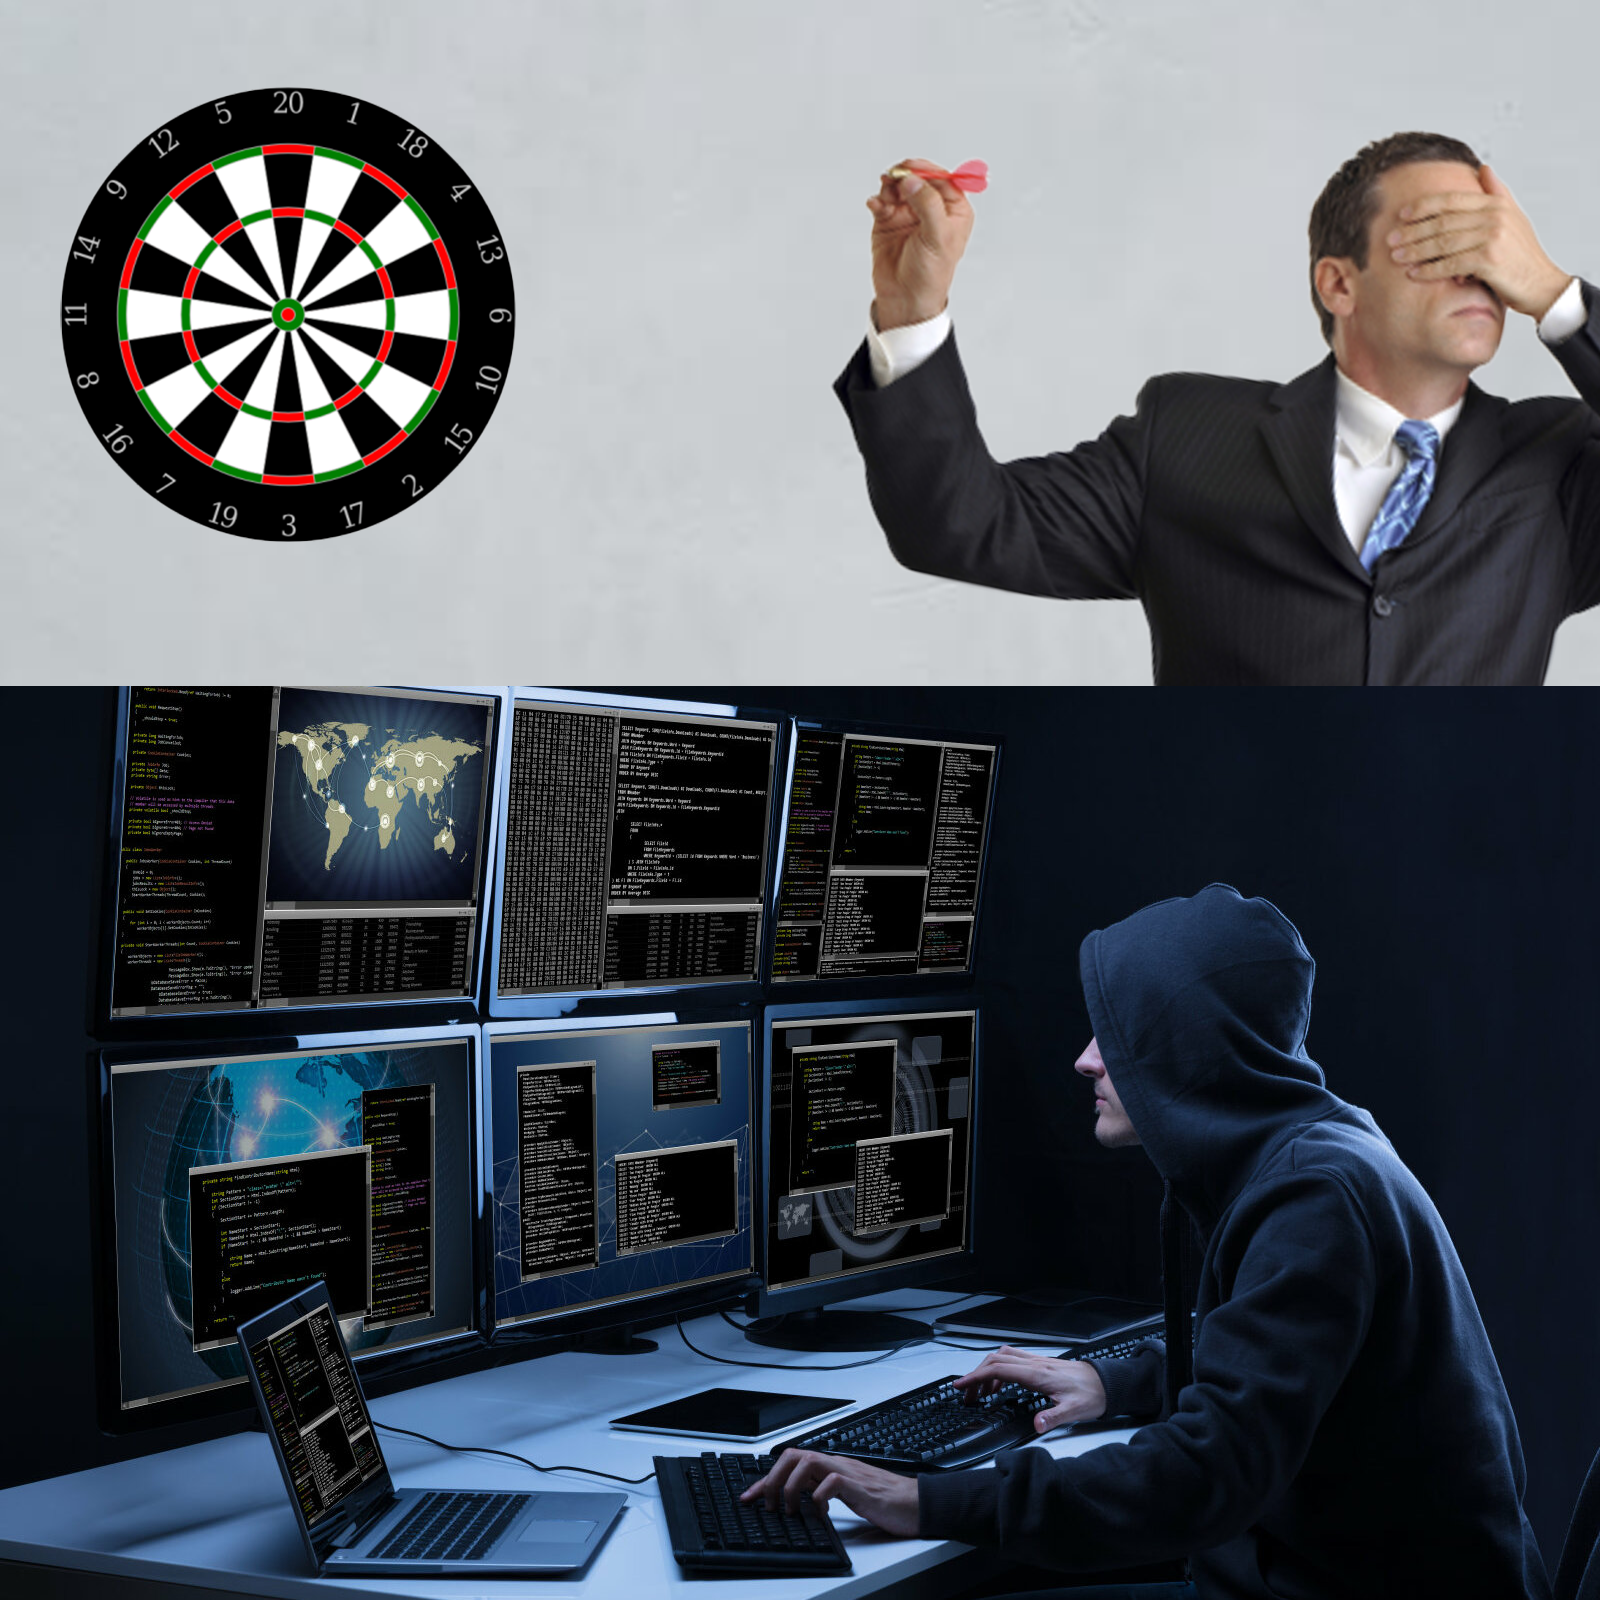 Shooting blindly at a dartboard vs careful consideration Blank Meme Template